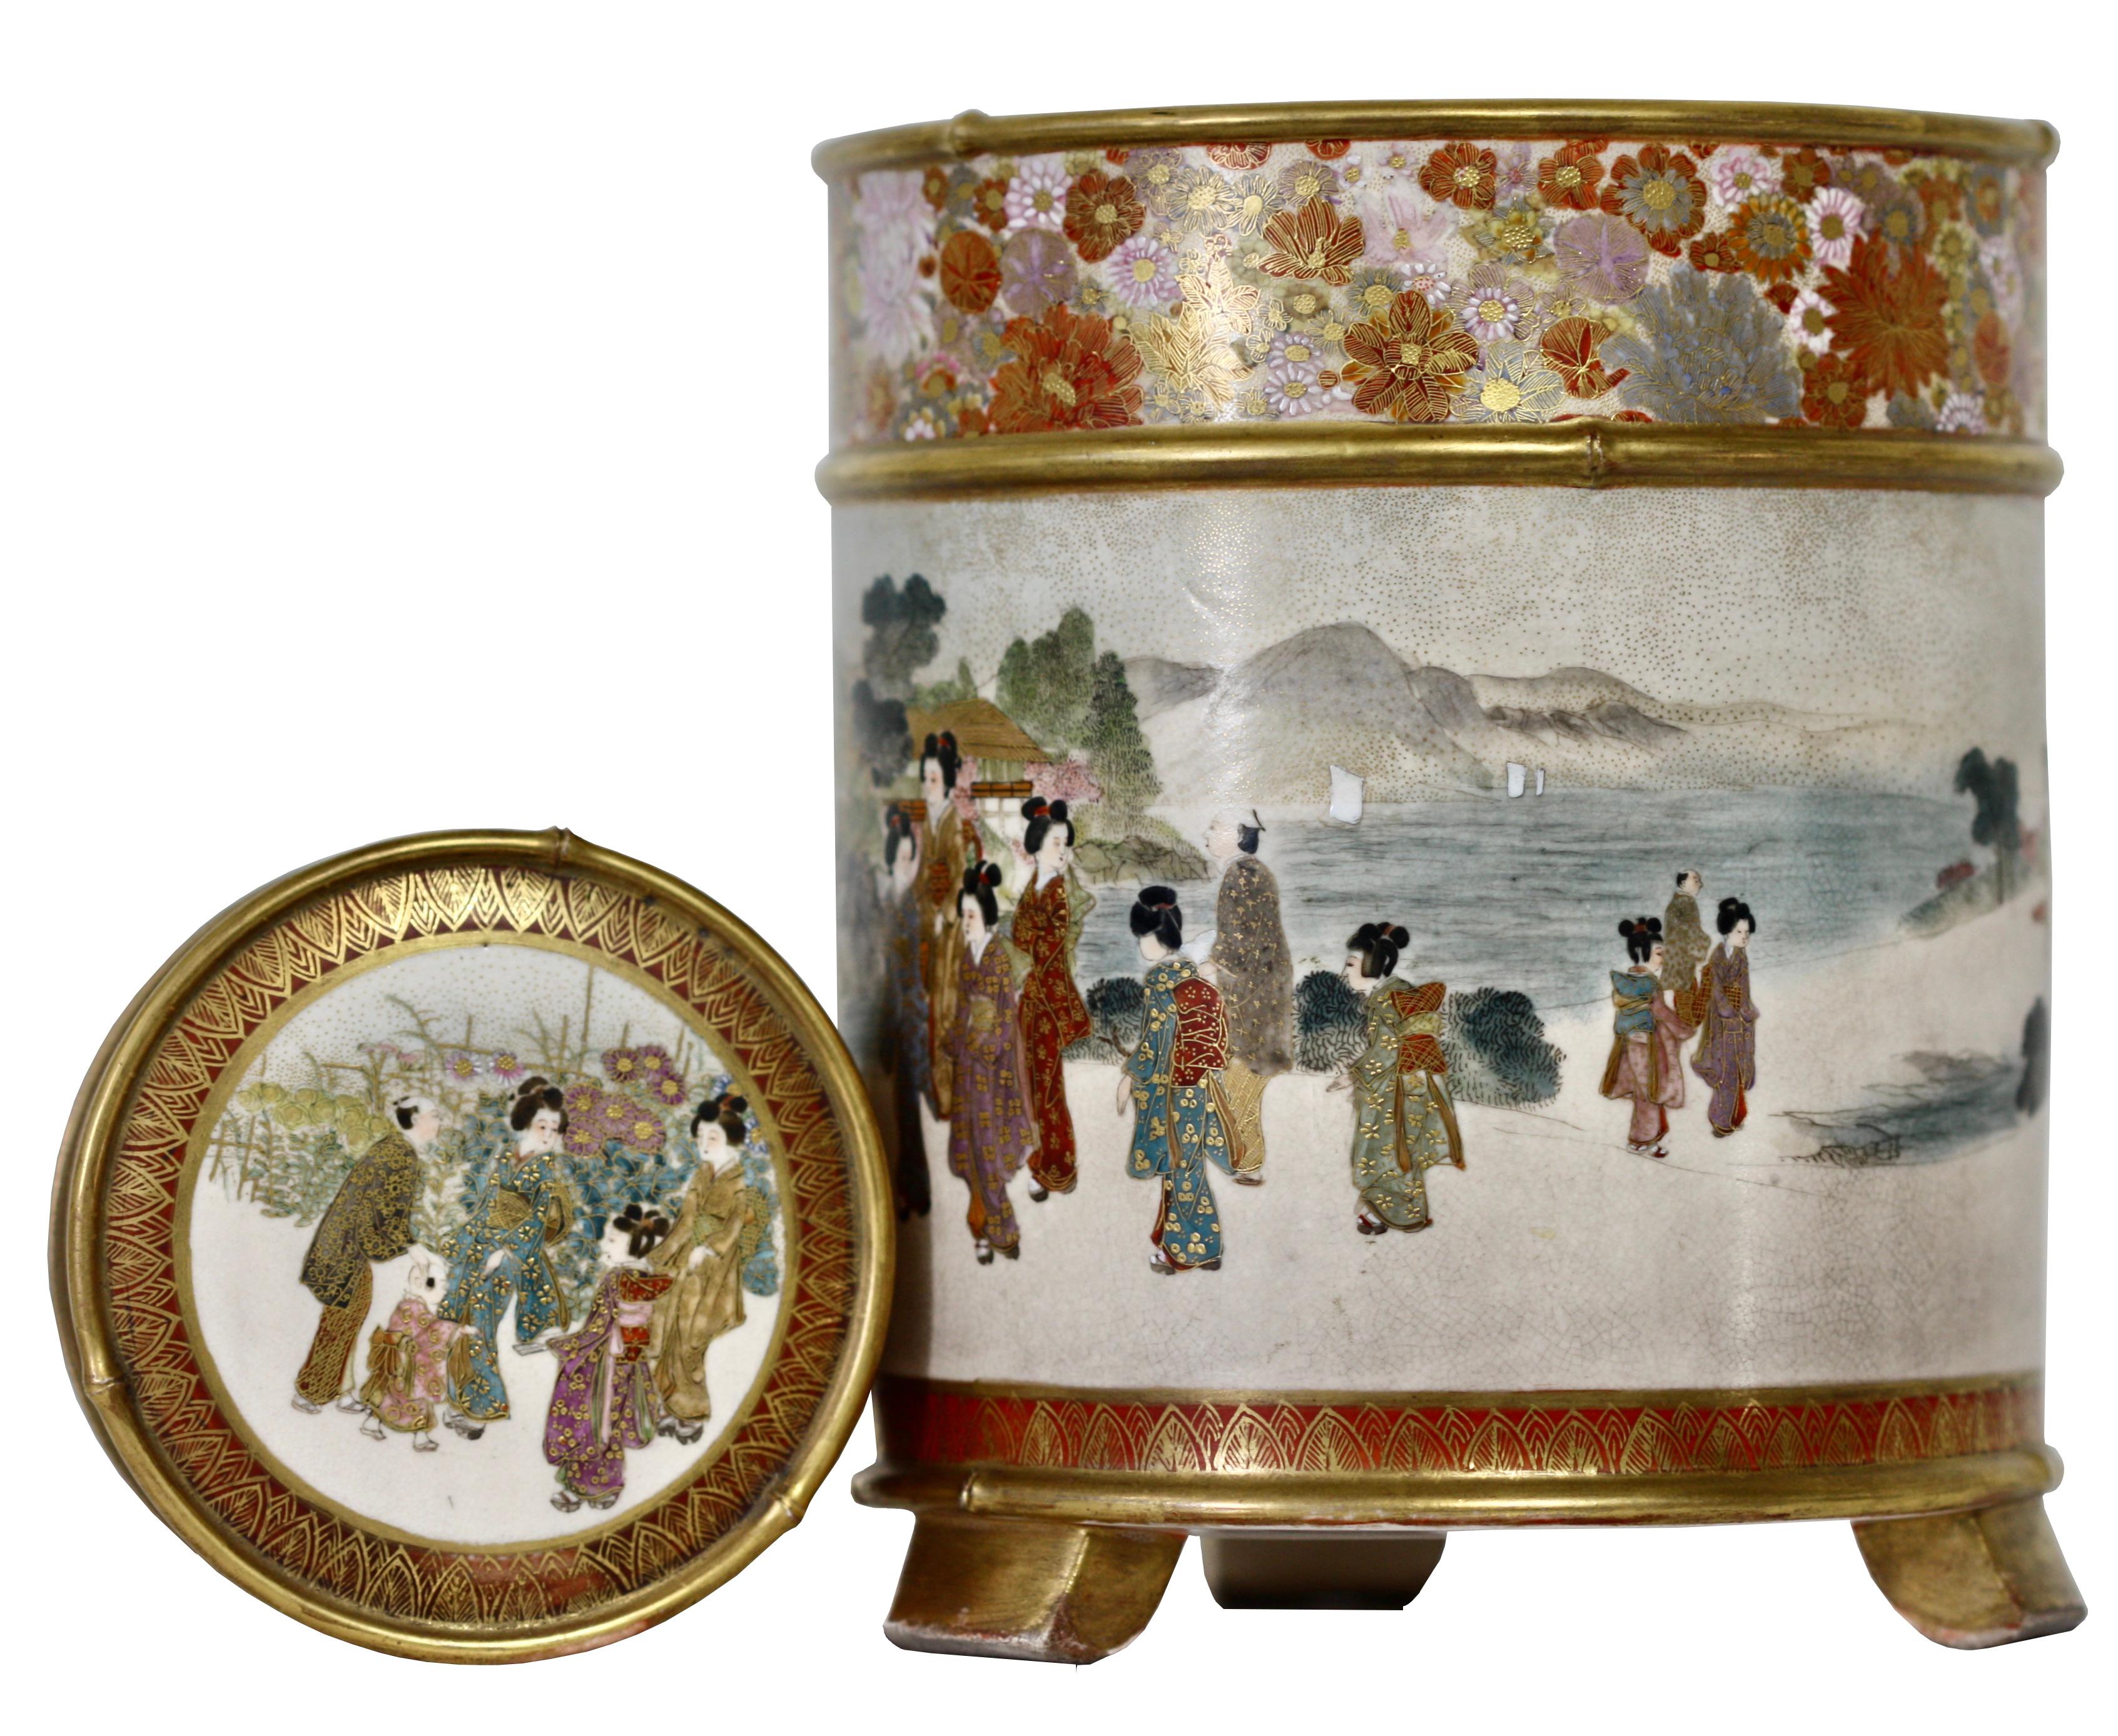 A Japanese Satsuma cylindrical koro and cover, signed Gyokuzan,
Meiji period (1868-1912)
Raised on three supports, painted and gilt with a continuous scene of ladies and children parading at leisure before a river scene, below a band of a